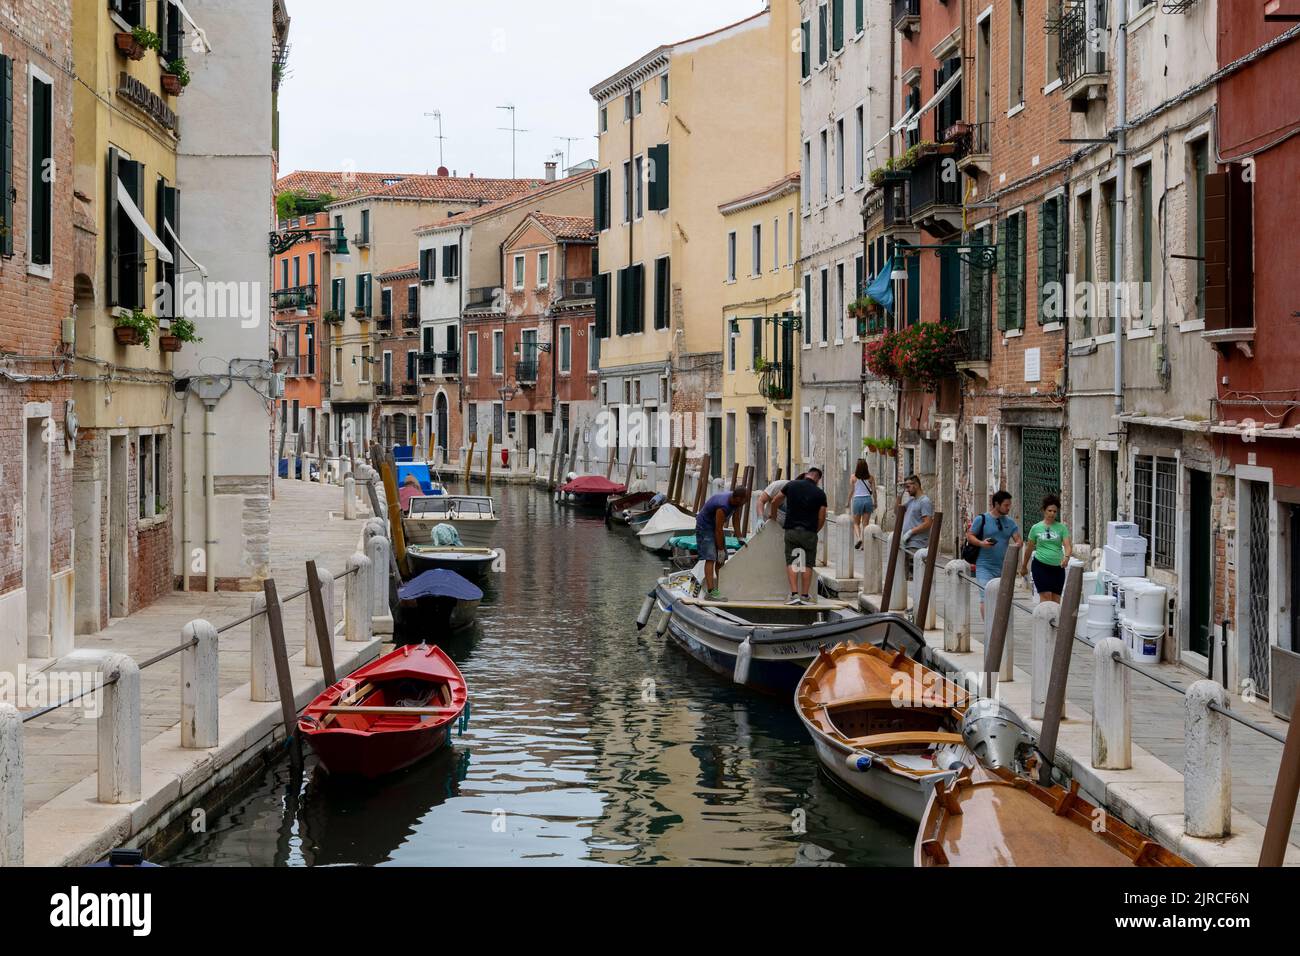 Boats parked at a water channel in Venice, Italy Stock Photo